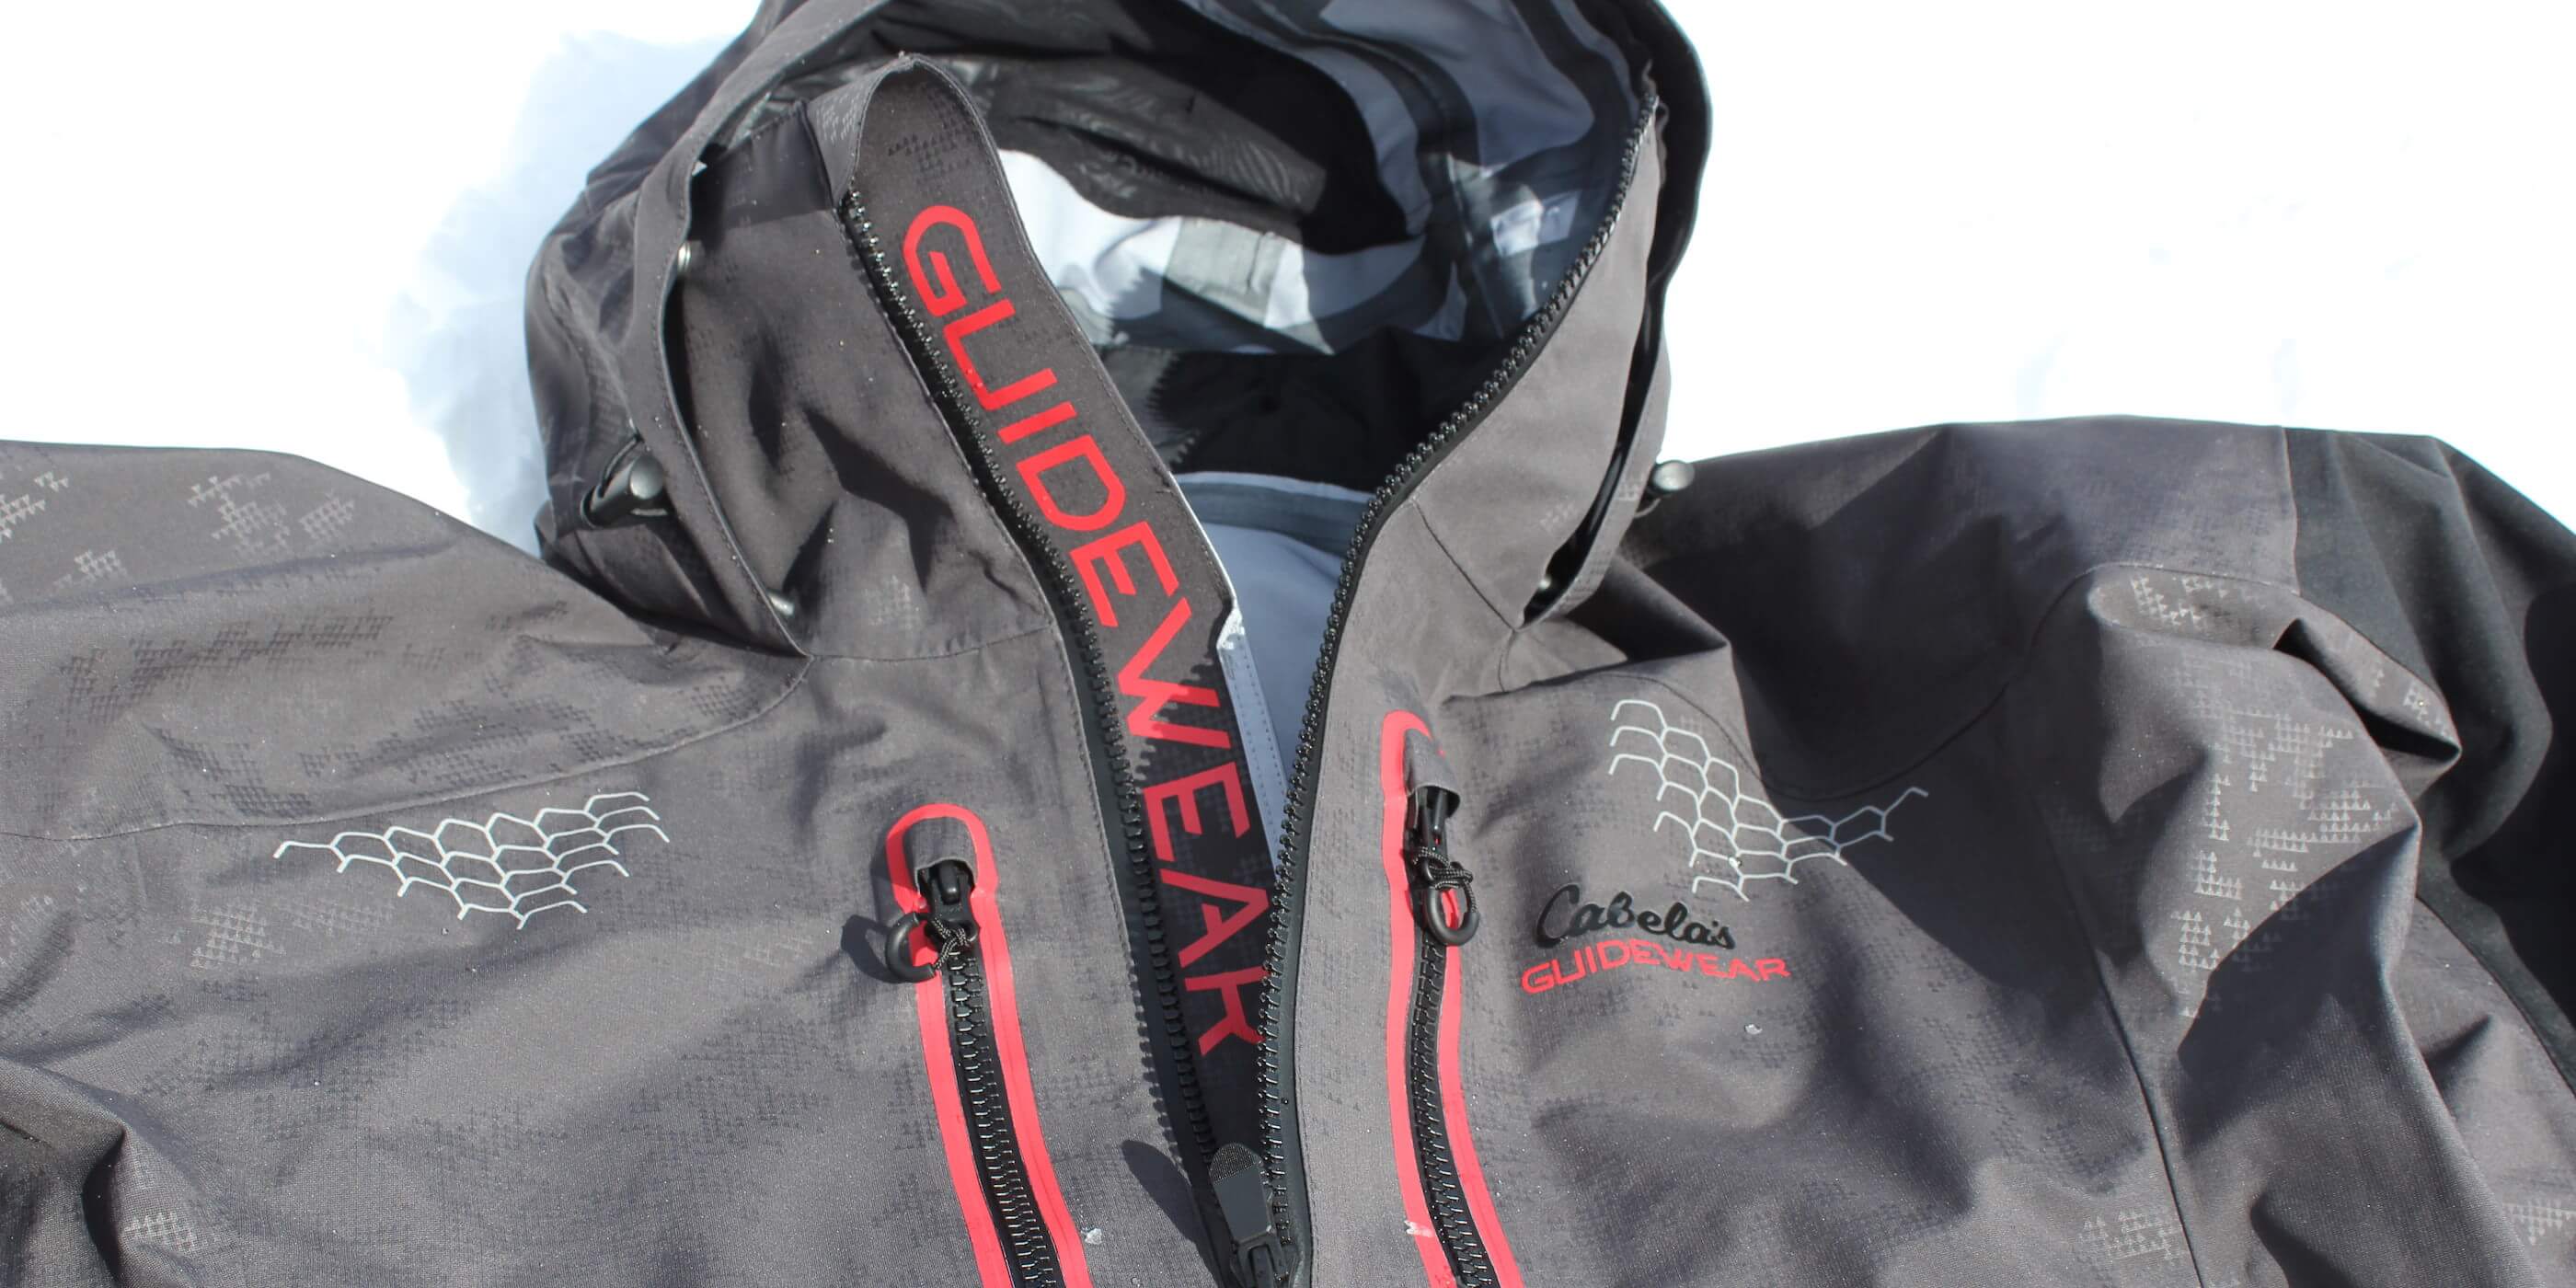 Cabela's Guidewear Advance Parka Review: First Look - Man Makes Fire